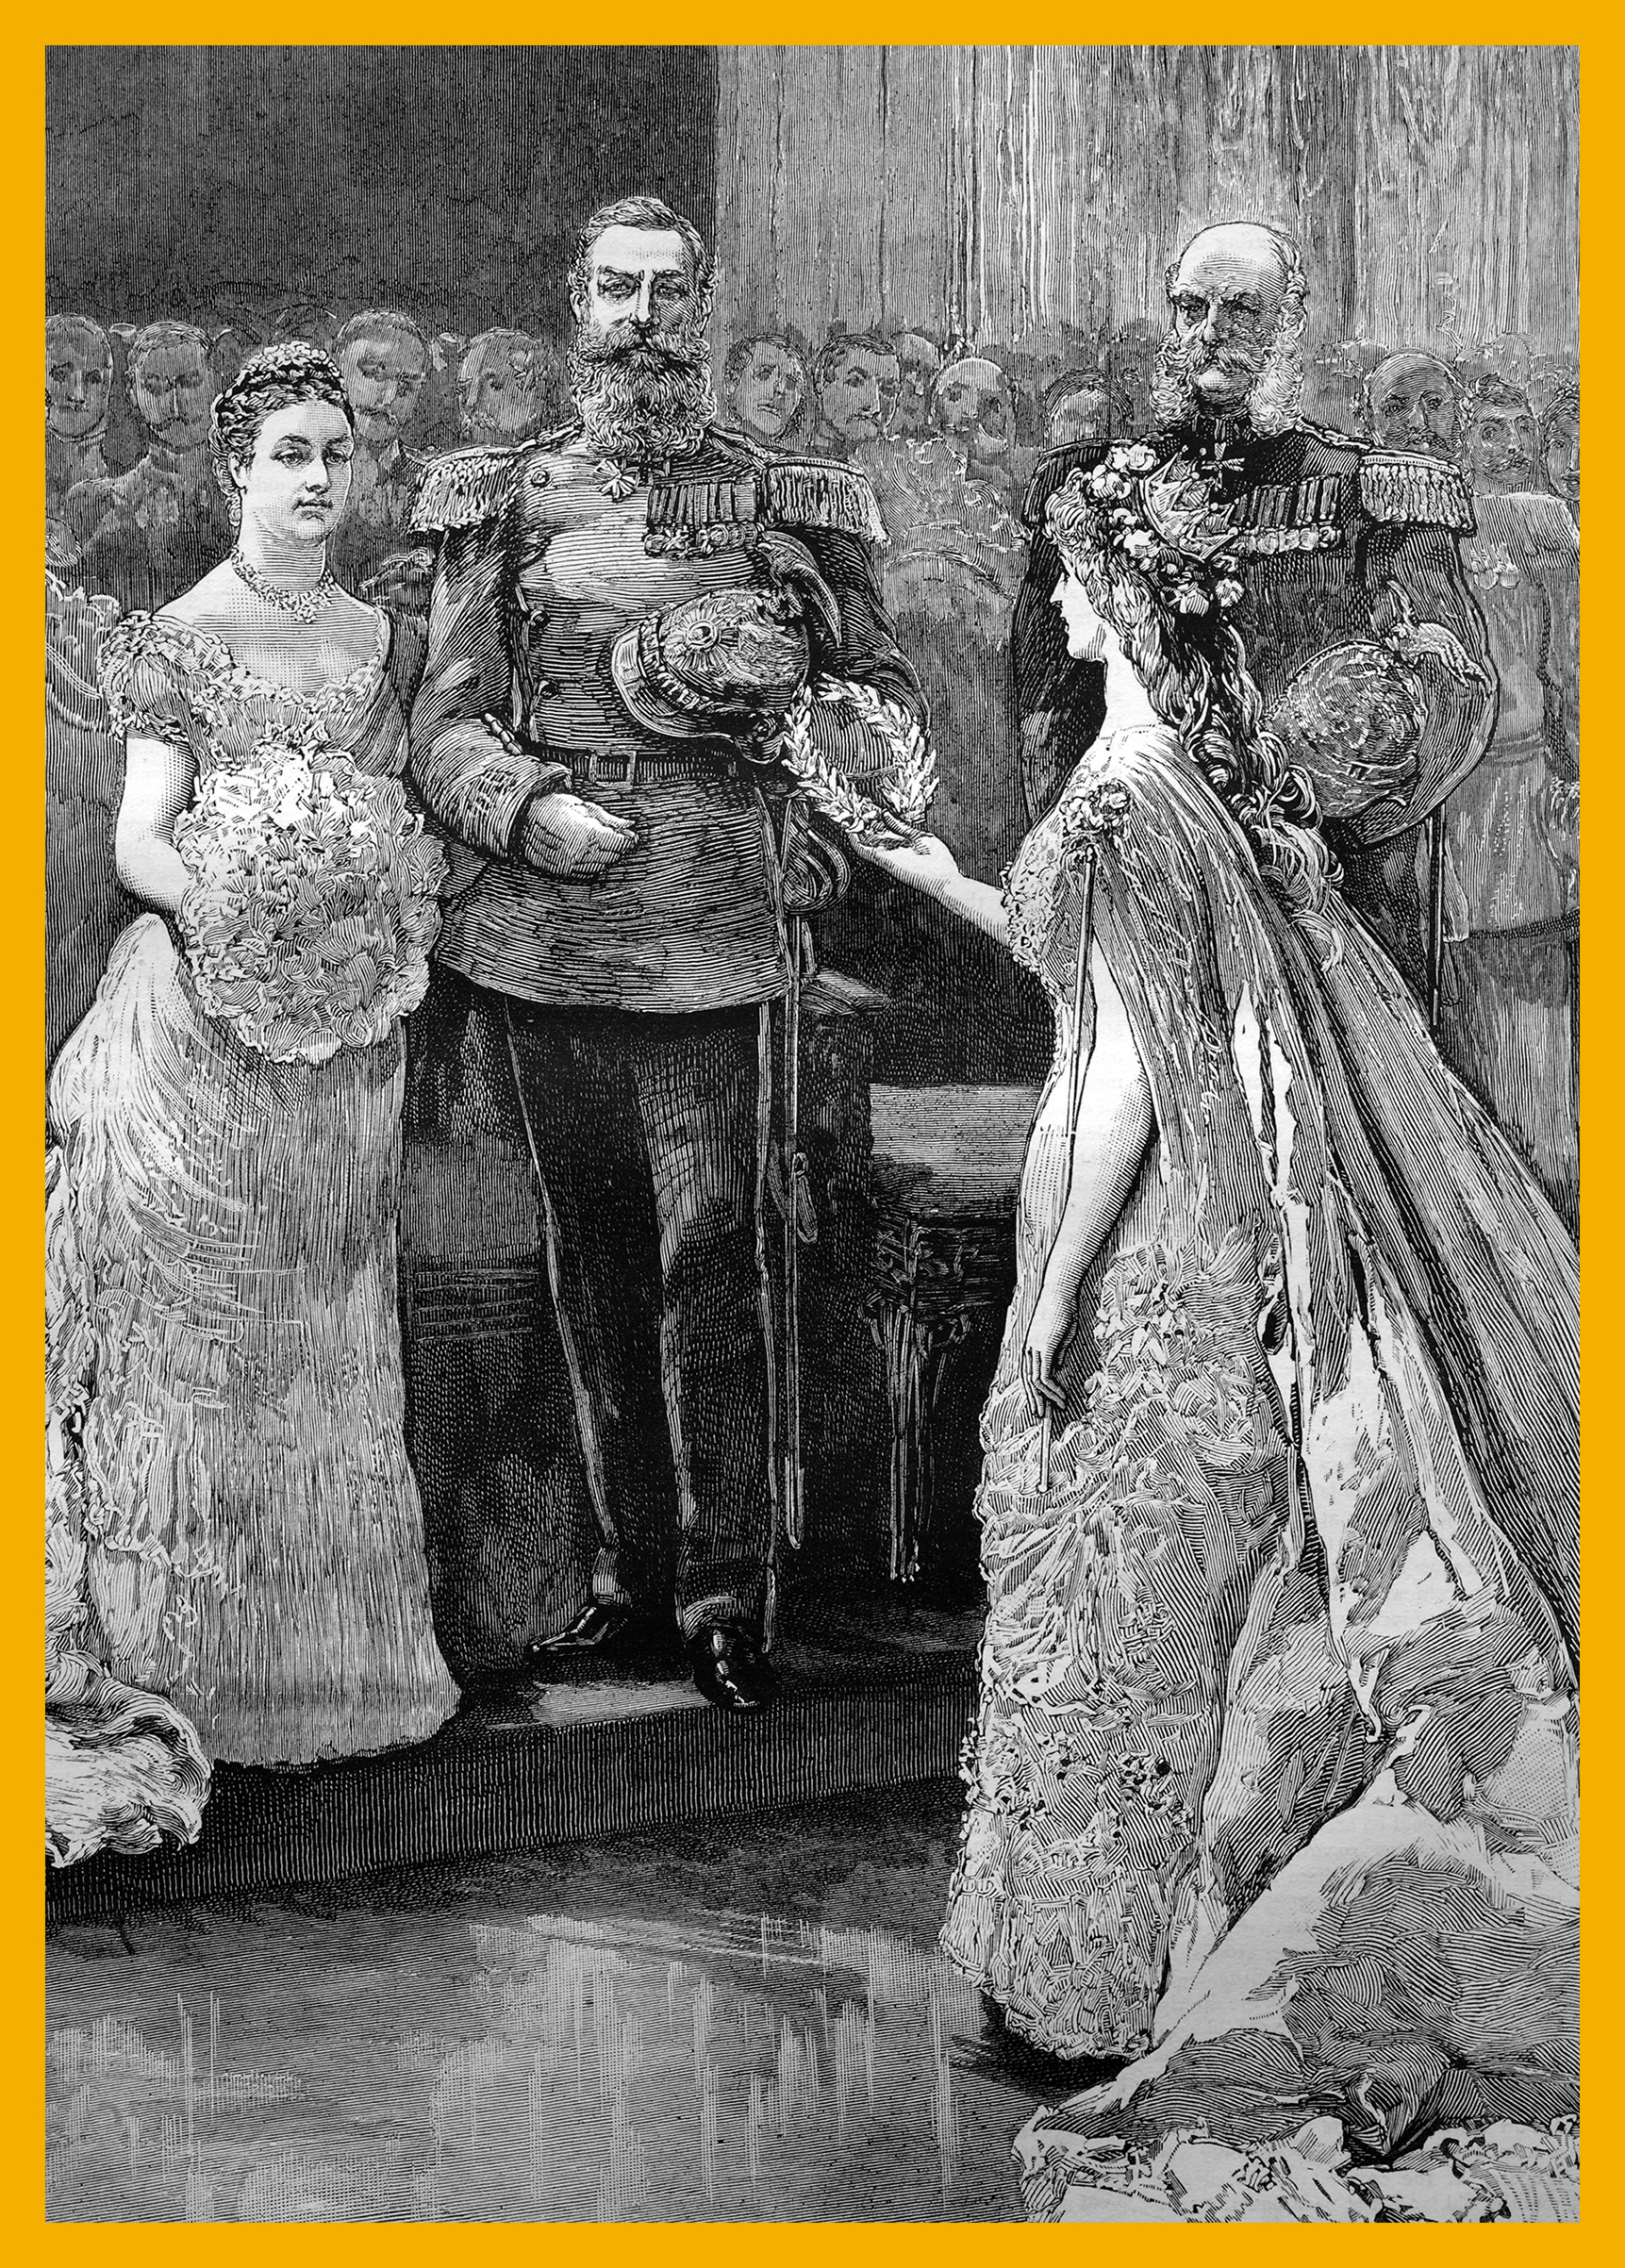 The silver wedding of the imperial prince and princess of Germany, the koenigin minne" or "queen of love" presenting a silver wreath to the imperial princess, historical illustration, 1884. (Bildagentur-online/uig via Getty Images)